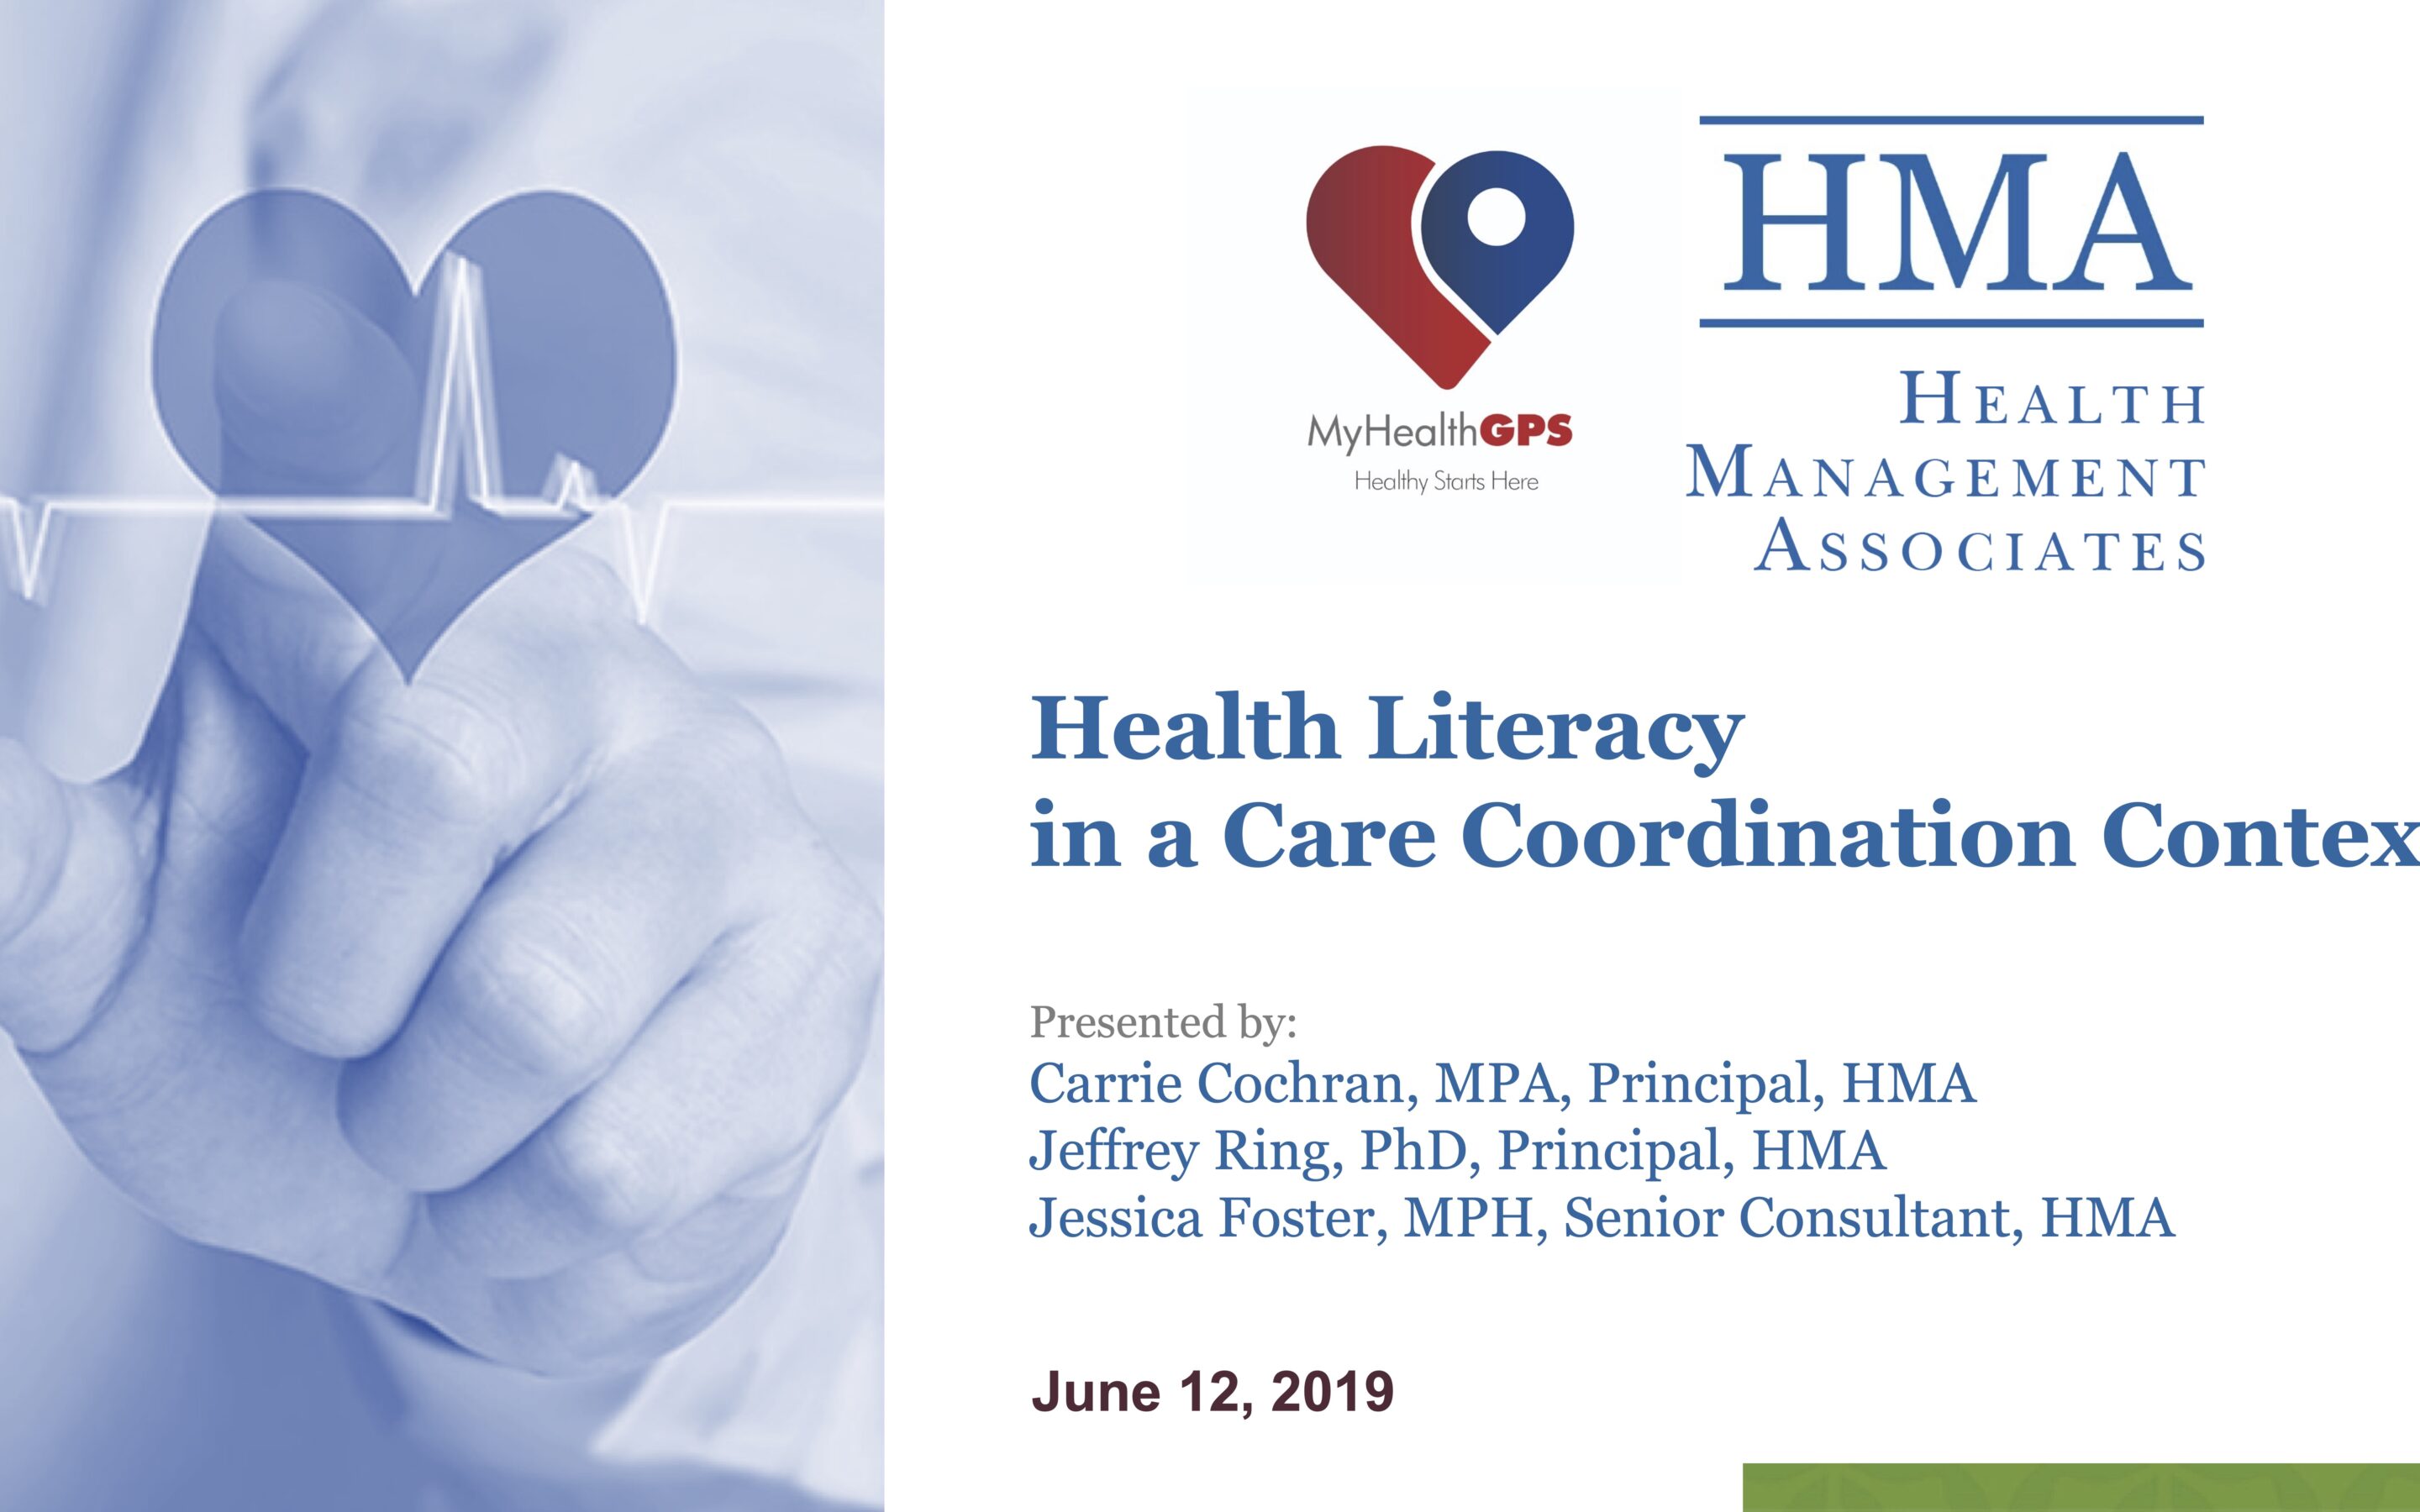 Health Literacy in a Care Coordination Context